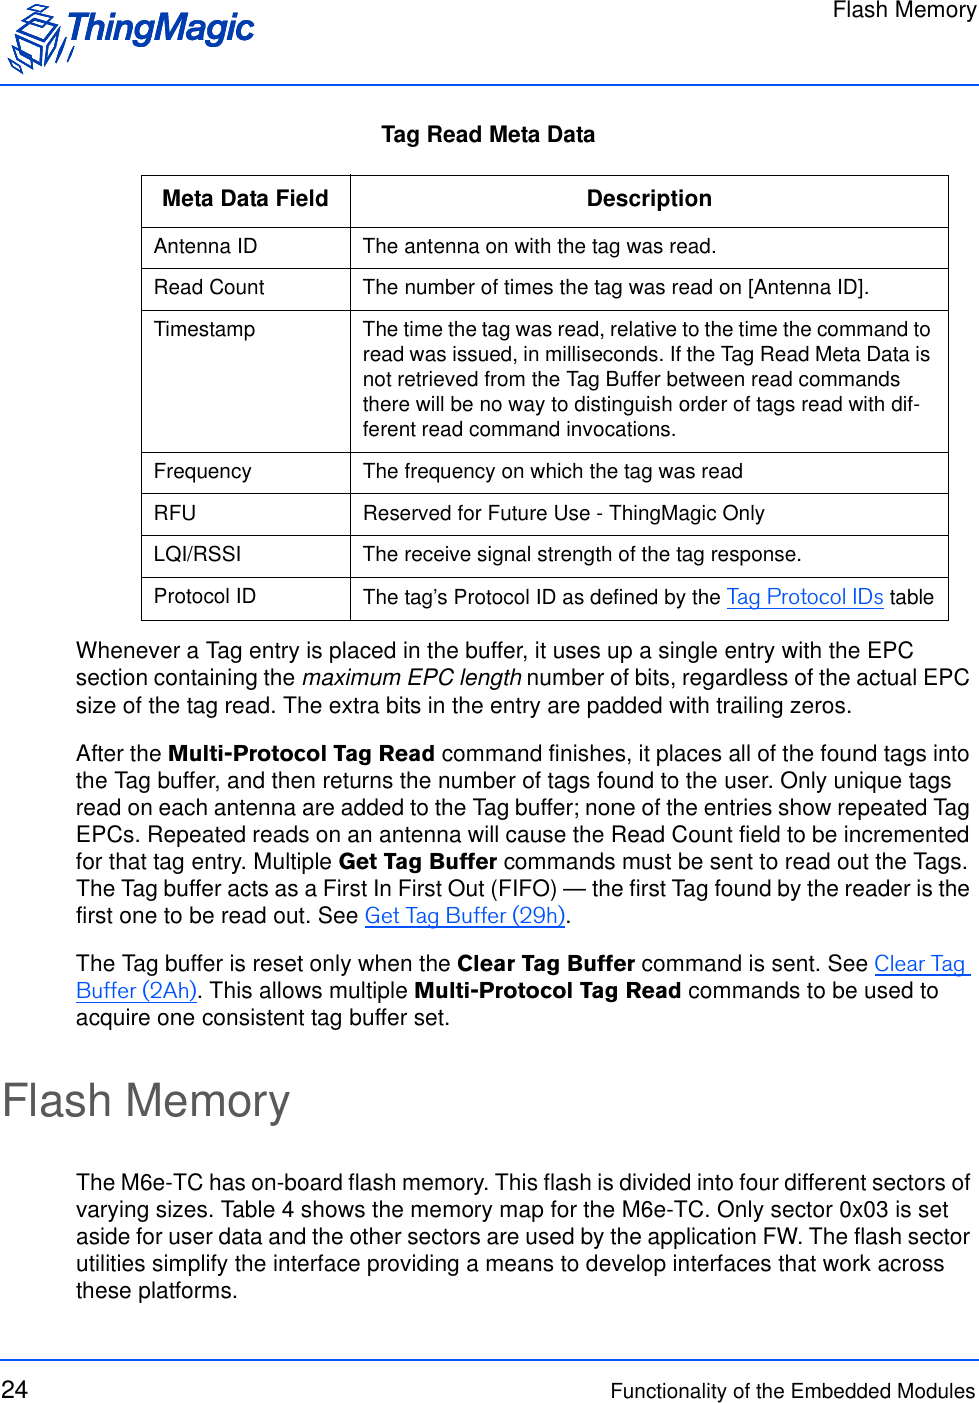 Flash Memory24 Functionality of the Embedded ModulesTag Read Meta DataWhenever a Tag entry is placed in the buffer, it uses up a single entry with the EPC section containing the maximum EPC length number of bits, regardless of the actual EPC size of the tag read. The extra bits in the entry are padded with trailing zeros.After the Multi-Protocol Tag Read command finishes, it places all of the found tags into the Tag buffer, and then returns the number of tags found to the user. Only unique tags read on each antenna are added to the Tag buffer; none of the entries show repeated Tag EPCs. Repeated reads on an antenna will cause the Read Count field to be incremented for that tag entry. Multiple Get Tag Buffer commands must be sent to read out the Tags. The Tag buffer acts as a First In First Out (FIFO) — the first Tag found by the reader is the first one to be read out. See Get Tag Buffer (29h).The Tag buffer is reset only when the Clear Tag Buffer command is sent. See Clear Tag Buffer (2Ah). This allows multiple Multi-Protocol Tag Read commands to be used to acquire one consistent tag buffer set. Flash MemoryThe M6e-TC has on-board flash memory. This flash is divided into four different sectors of varying sizes. Table 4 shows the memory map for the M6e-TC. Only sector 0x03 is set aside for user data and the other sectors are used by the application FW. The flash sector utilities simplify the interface providing a means to develop interfaces that work across these platforms. Meta Data Field DescriptionAntenna ID The antenna on with the tag was read.Read Count The number of times the tag was read on [Antenna ID]. Timestamp The time the tag was read, relative to the time the command to read was issued, in milliseconds. If the Tag Read Meta Data is not retrieved from the Tag Buffer between read commands there will be no way to distinguish order of tags read with dif-ferent read command invocations. Frequency The frequency on which the tag was readRFU Reserved for Future Use - ThingMagic OnlyLQI/RSSI The receive signal strength of the tag response.Protocol ID The tag’s Protocol ID as defined by the Tag Protocol IDs table